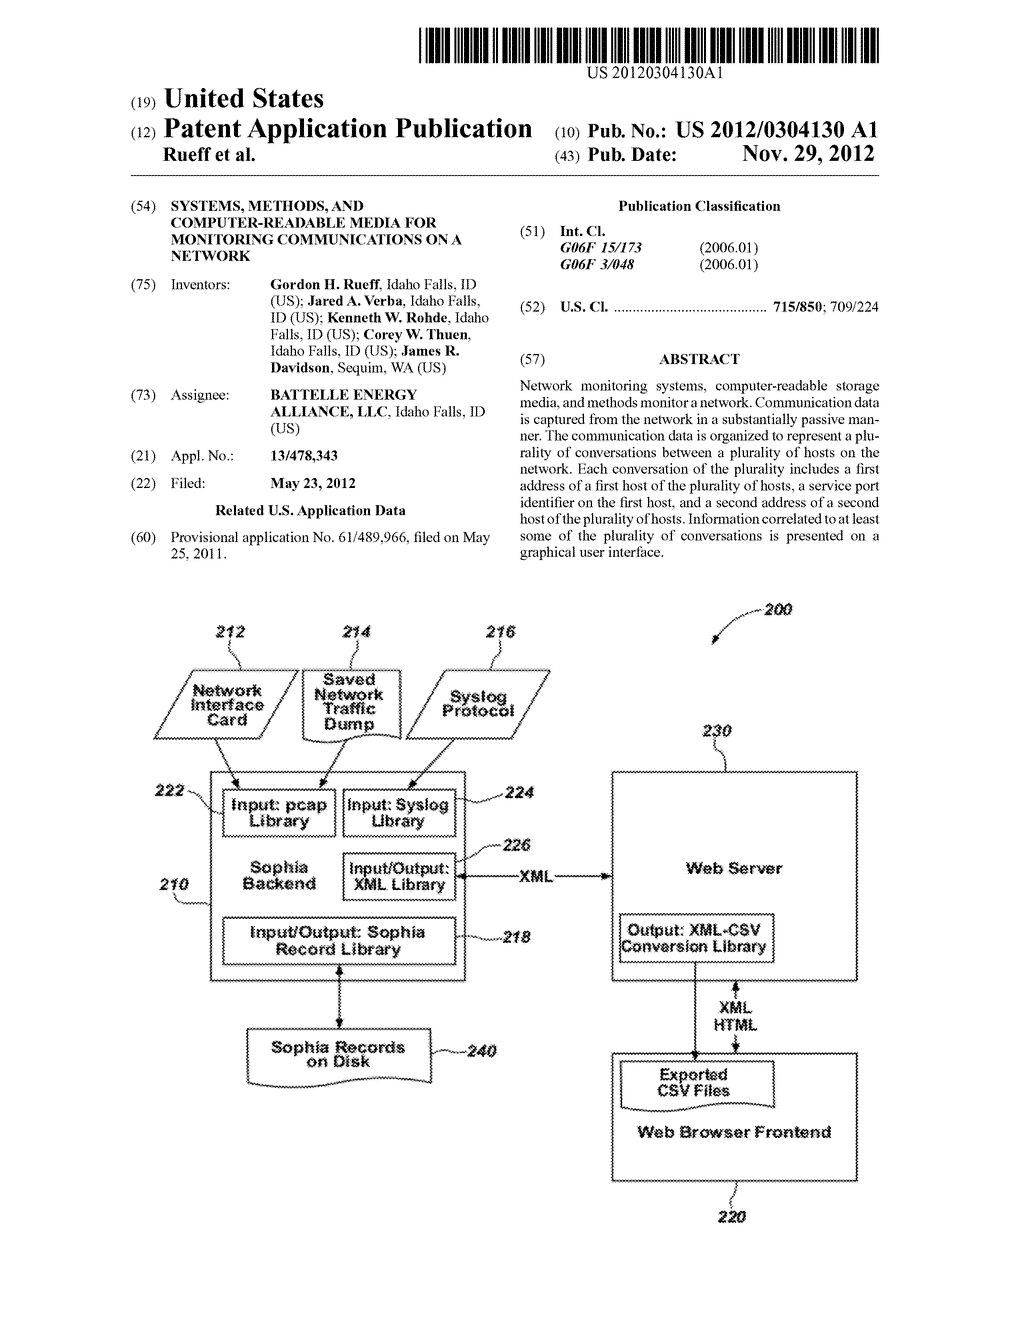 SYSTEMS, METHODS, AND COMPUTER-READABLE MEDIA FOR MONITORING     COMMUNICATIONS ON A NETWORK - diagram, schematic, and image 01